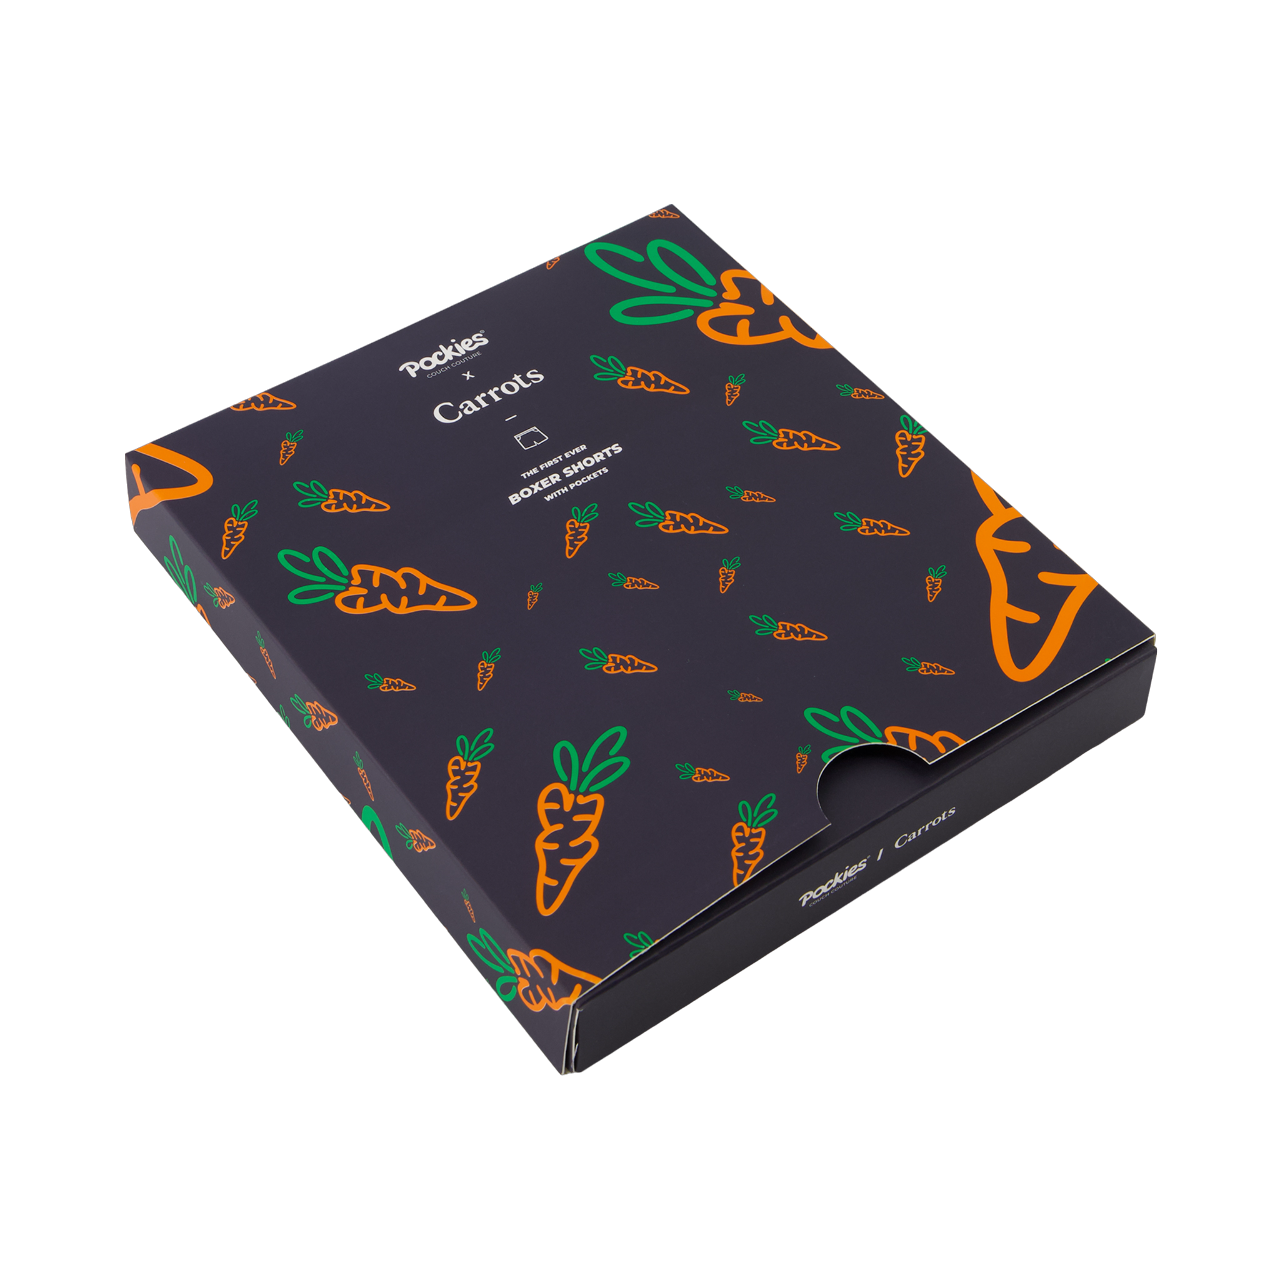 CARROTS BY POCKIES BOXERS - NAVY